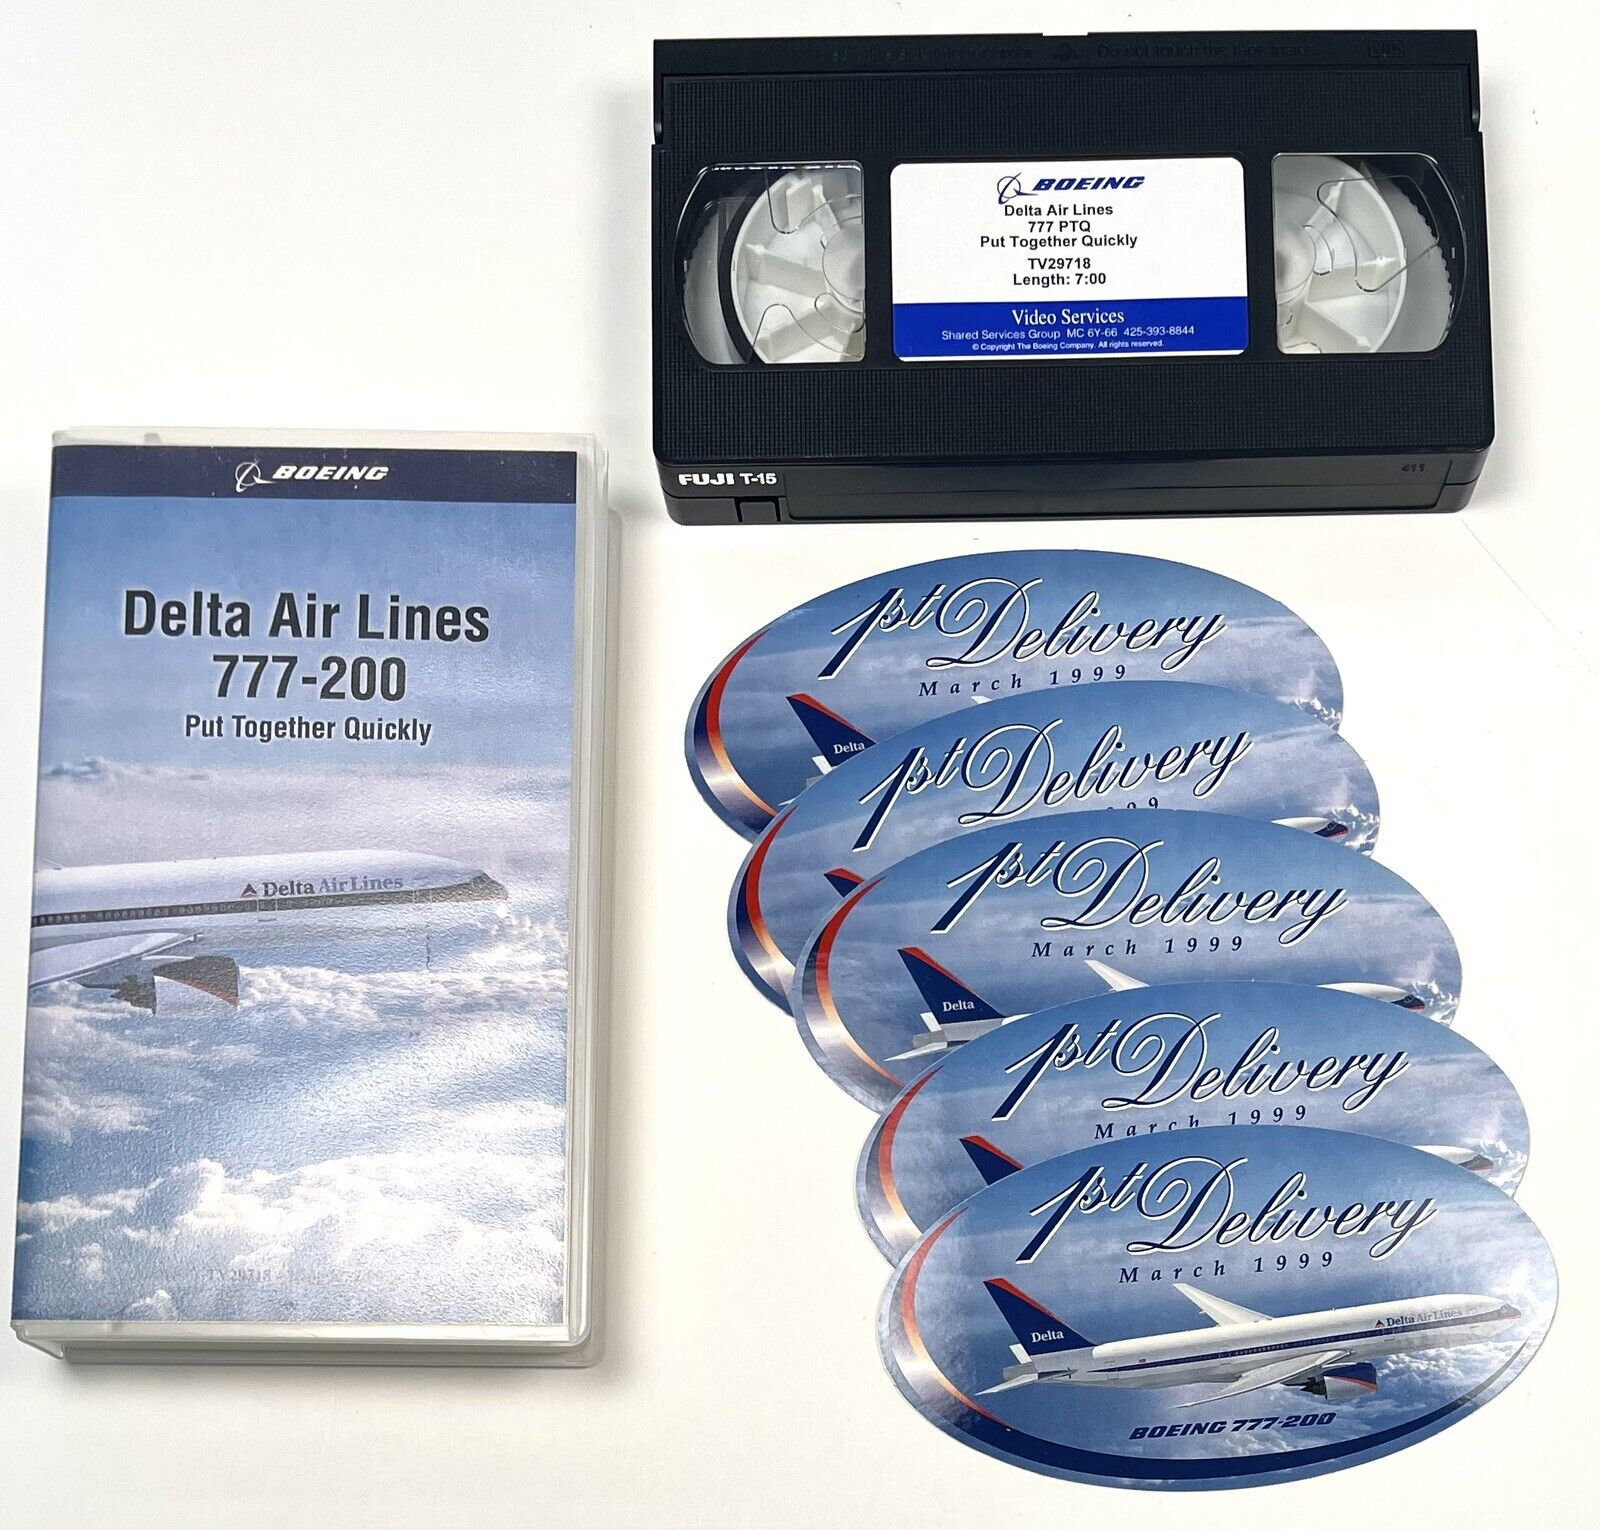 Boeing Delta Air Lines 777-200: Put Together Quickly (1998, VHS) + 5 Stickers